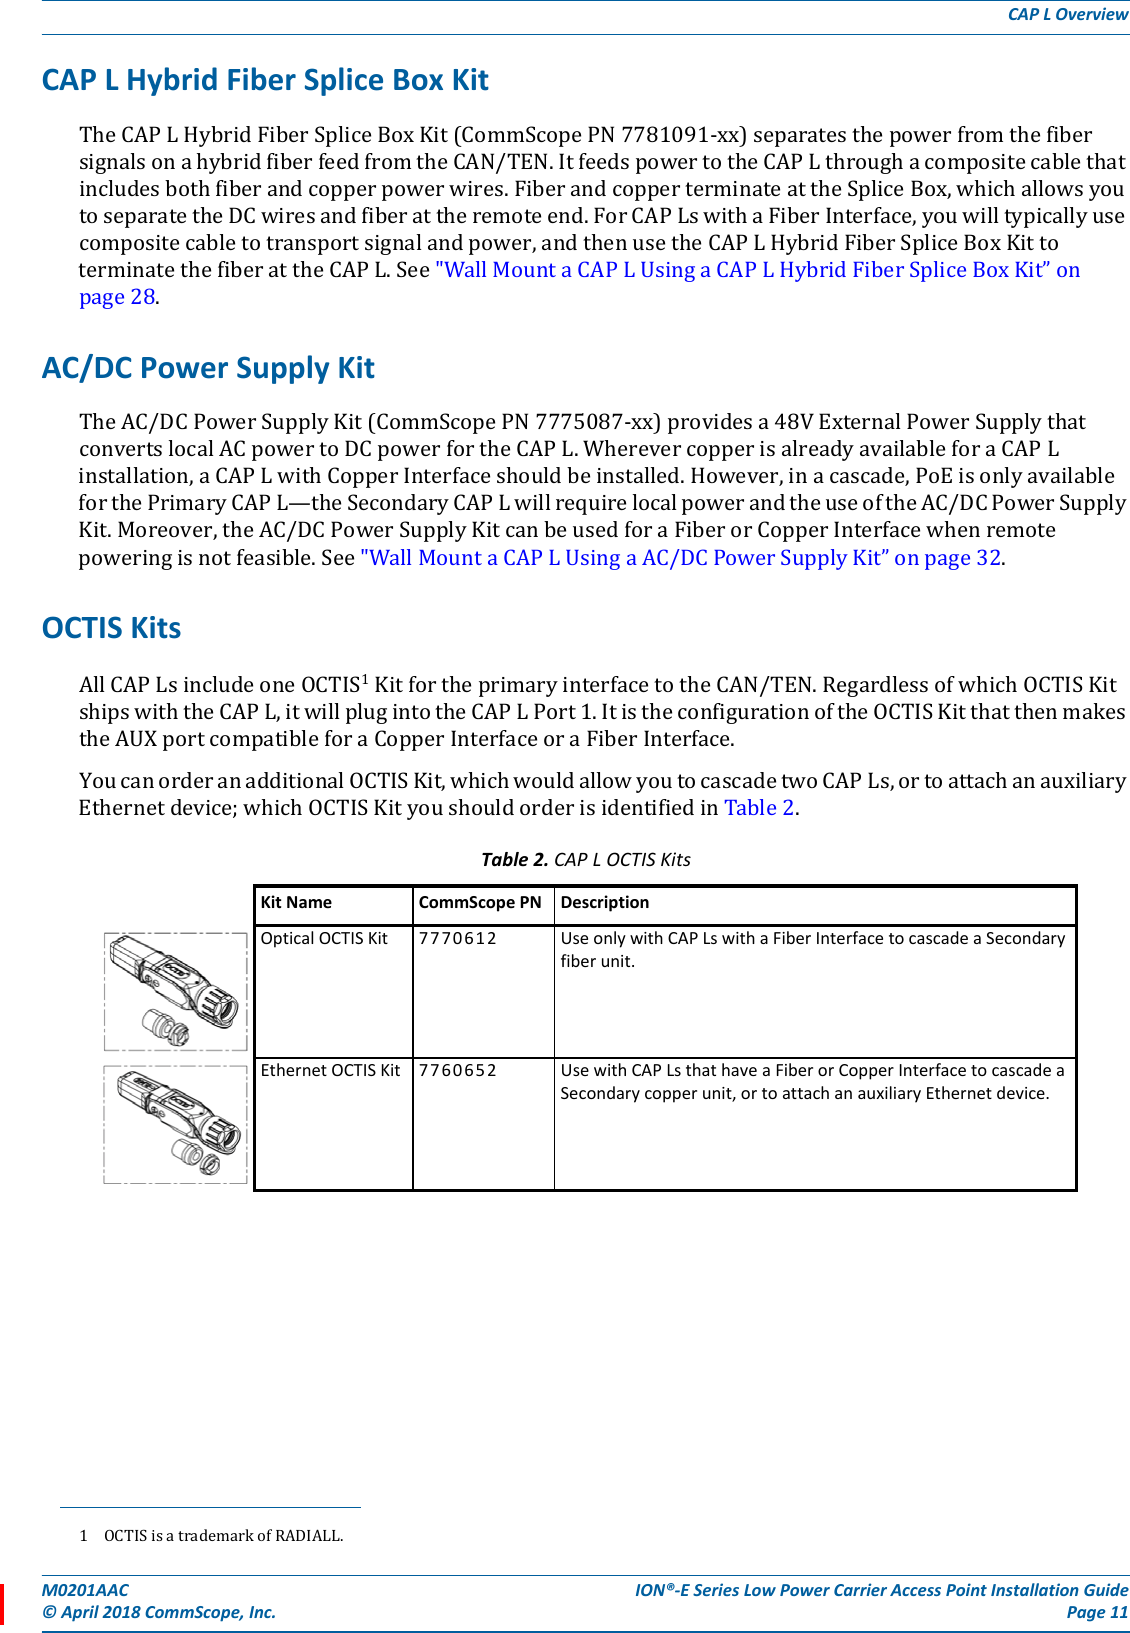 M0201AAC ION®-E Series Low Power Carrier Access Point Installation Guide© April 2018 CommScope, Inc. Page 11CAP L OverviewCAP L Hybrid Fiber Splice Box KitTheCAPLHybridFiberSpliceBoxKit(CommScopePN7781091-xx)separatesthepowerfromthefibersignalsonahybridfiberfeedfromtheCAN/TEN.ItfeedspowertotheCAPLthroughacompositecablethatincludesbothfiberandcopperpowerwires.FiberandcopperterminateattheSpliceBox,whichallowsyoutoseparatetheDCwiresandfiberattheremoteend.ForCAPLswithaFiberInterface,youwilltypicallyusecompositecabletotransportsignalandpower,andthenusetheCAPLHybridFiberSpliceBoxKittoterminatethefiberattheCAPL.See&quot;WallMountaCAPLUsingaCAPLHybridFiberSpliceBoxKit”onpage28.AC/DC Power Supply KitTheAC/DCPowerSupplyKit(CommScopePN7775087-xx)providesa48VExternalPowerSupplythatconvertslocalACpowertoDCpowerfortheCAPL.WherevercopperisalreadyavailableforaCAPLinstallation,aCAPLwithCopperInterfaceshouldbeinstalled.However,inacascade,PoEisonlyavailableforthePrimaryCAPL—theSecondaryCAPLwillrequirelocalpowerandtheuseoftheAC/DCPowerSupplyKit.Moreover,theAC/DCPowerSupplyKitcanbeusedforaFiberorCopperInterfacewhenremotepoweringisnotfeasible.See&quot;WallMountaCAPLUsingaAC/DCPowerSupplyKit”onpage32.OCTIS KitsAllCAPLsincludeoneOCTIS1KitfortheprimaryinterfacetotheCAN/TEN.RegardlessofwhichOCTISKitshipswiththeCAPL,itwillplugintotheCAPLPort1.ItistheconfigurationoftheOCTISKitthatthenmakestheAUXportcompatibleforaCopperInterfaceoraFiberInterface.YoucanorderanadditionalOCTISKit,whichwouldallowyoutocascadetwoCAPLs,ortoattachanauxiliaryEthernetdevice;whichOCTISKityoushouldorderisidentifiedinTable2.1 OCTISisatrademarkofRADIALL.Table 2. CAP LOCTIS KitsKit Name CommScope PN DescriptionOptical OCTIS Kit 7770612 Use only with CAP Ls with a Fiber Interface to cascade a Secondary fiber unit.Ethernet OCTIS Kit 7760652 Use with CAP Ls that have a Fiber or Copper Interface to cascade a Secondary copper unit, or to attach an auxiliary Ethernet device.